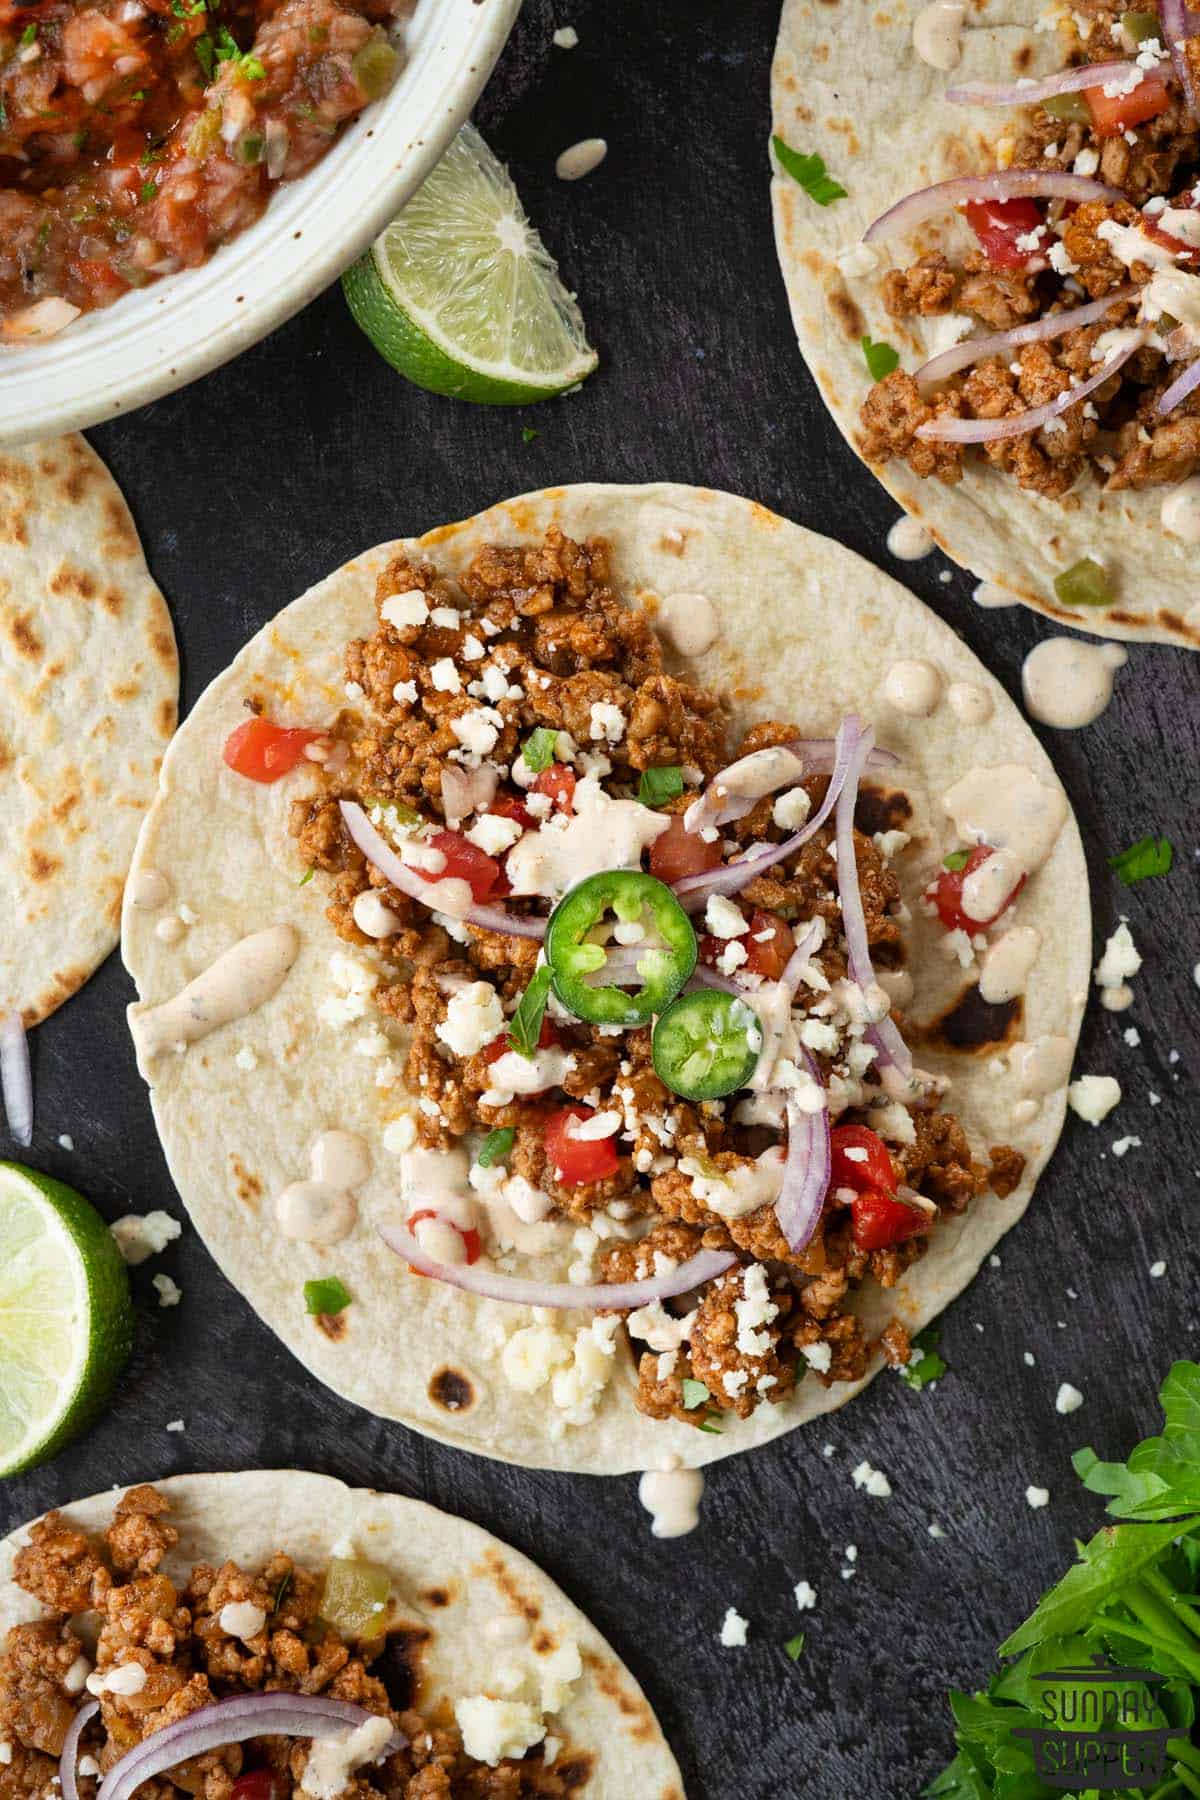 chipotle ranch drizzled over assembled tacos